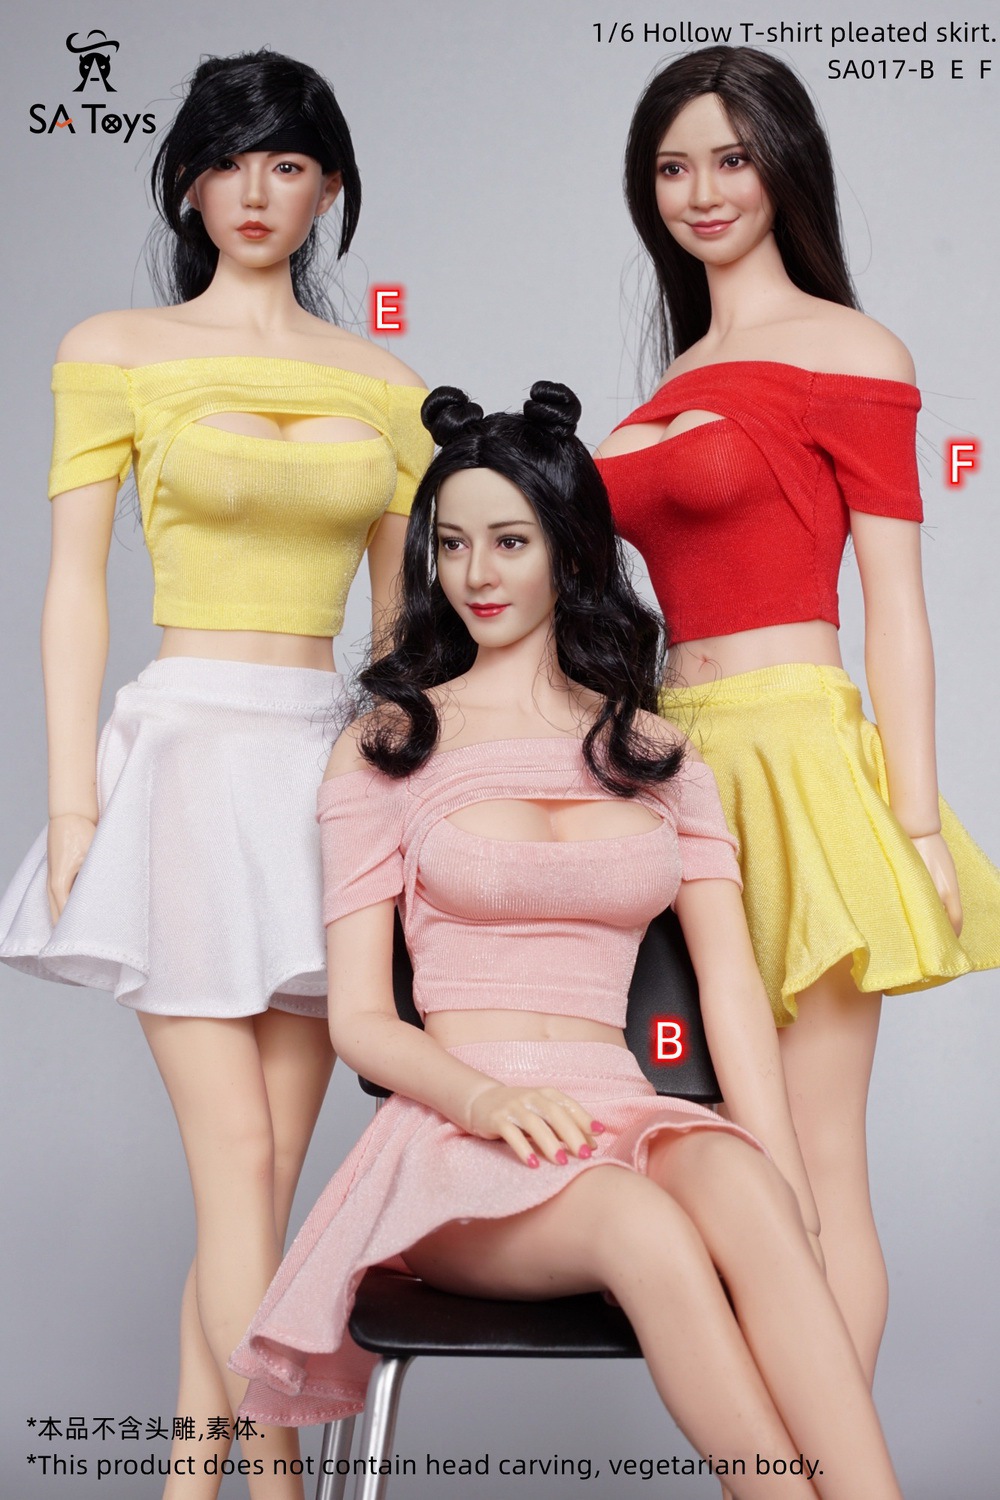 T-shirtpleatedskirt - NEW PRODUCT: SA Toys: 1/6 Personalized Poster Style Tight Dress/ Hollow T-shirt Pleated Skirt/Side Zipper Tight Skirt [Various styles available]  16560010